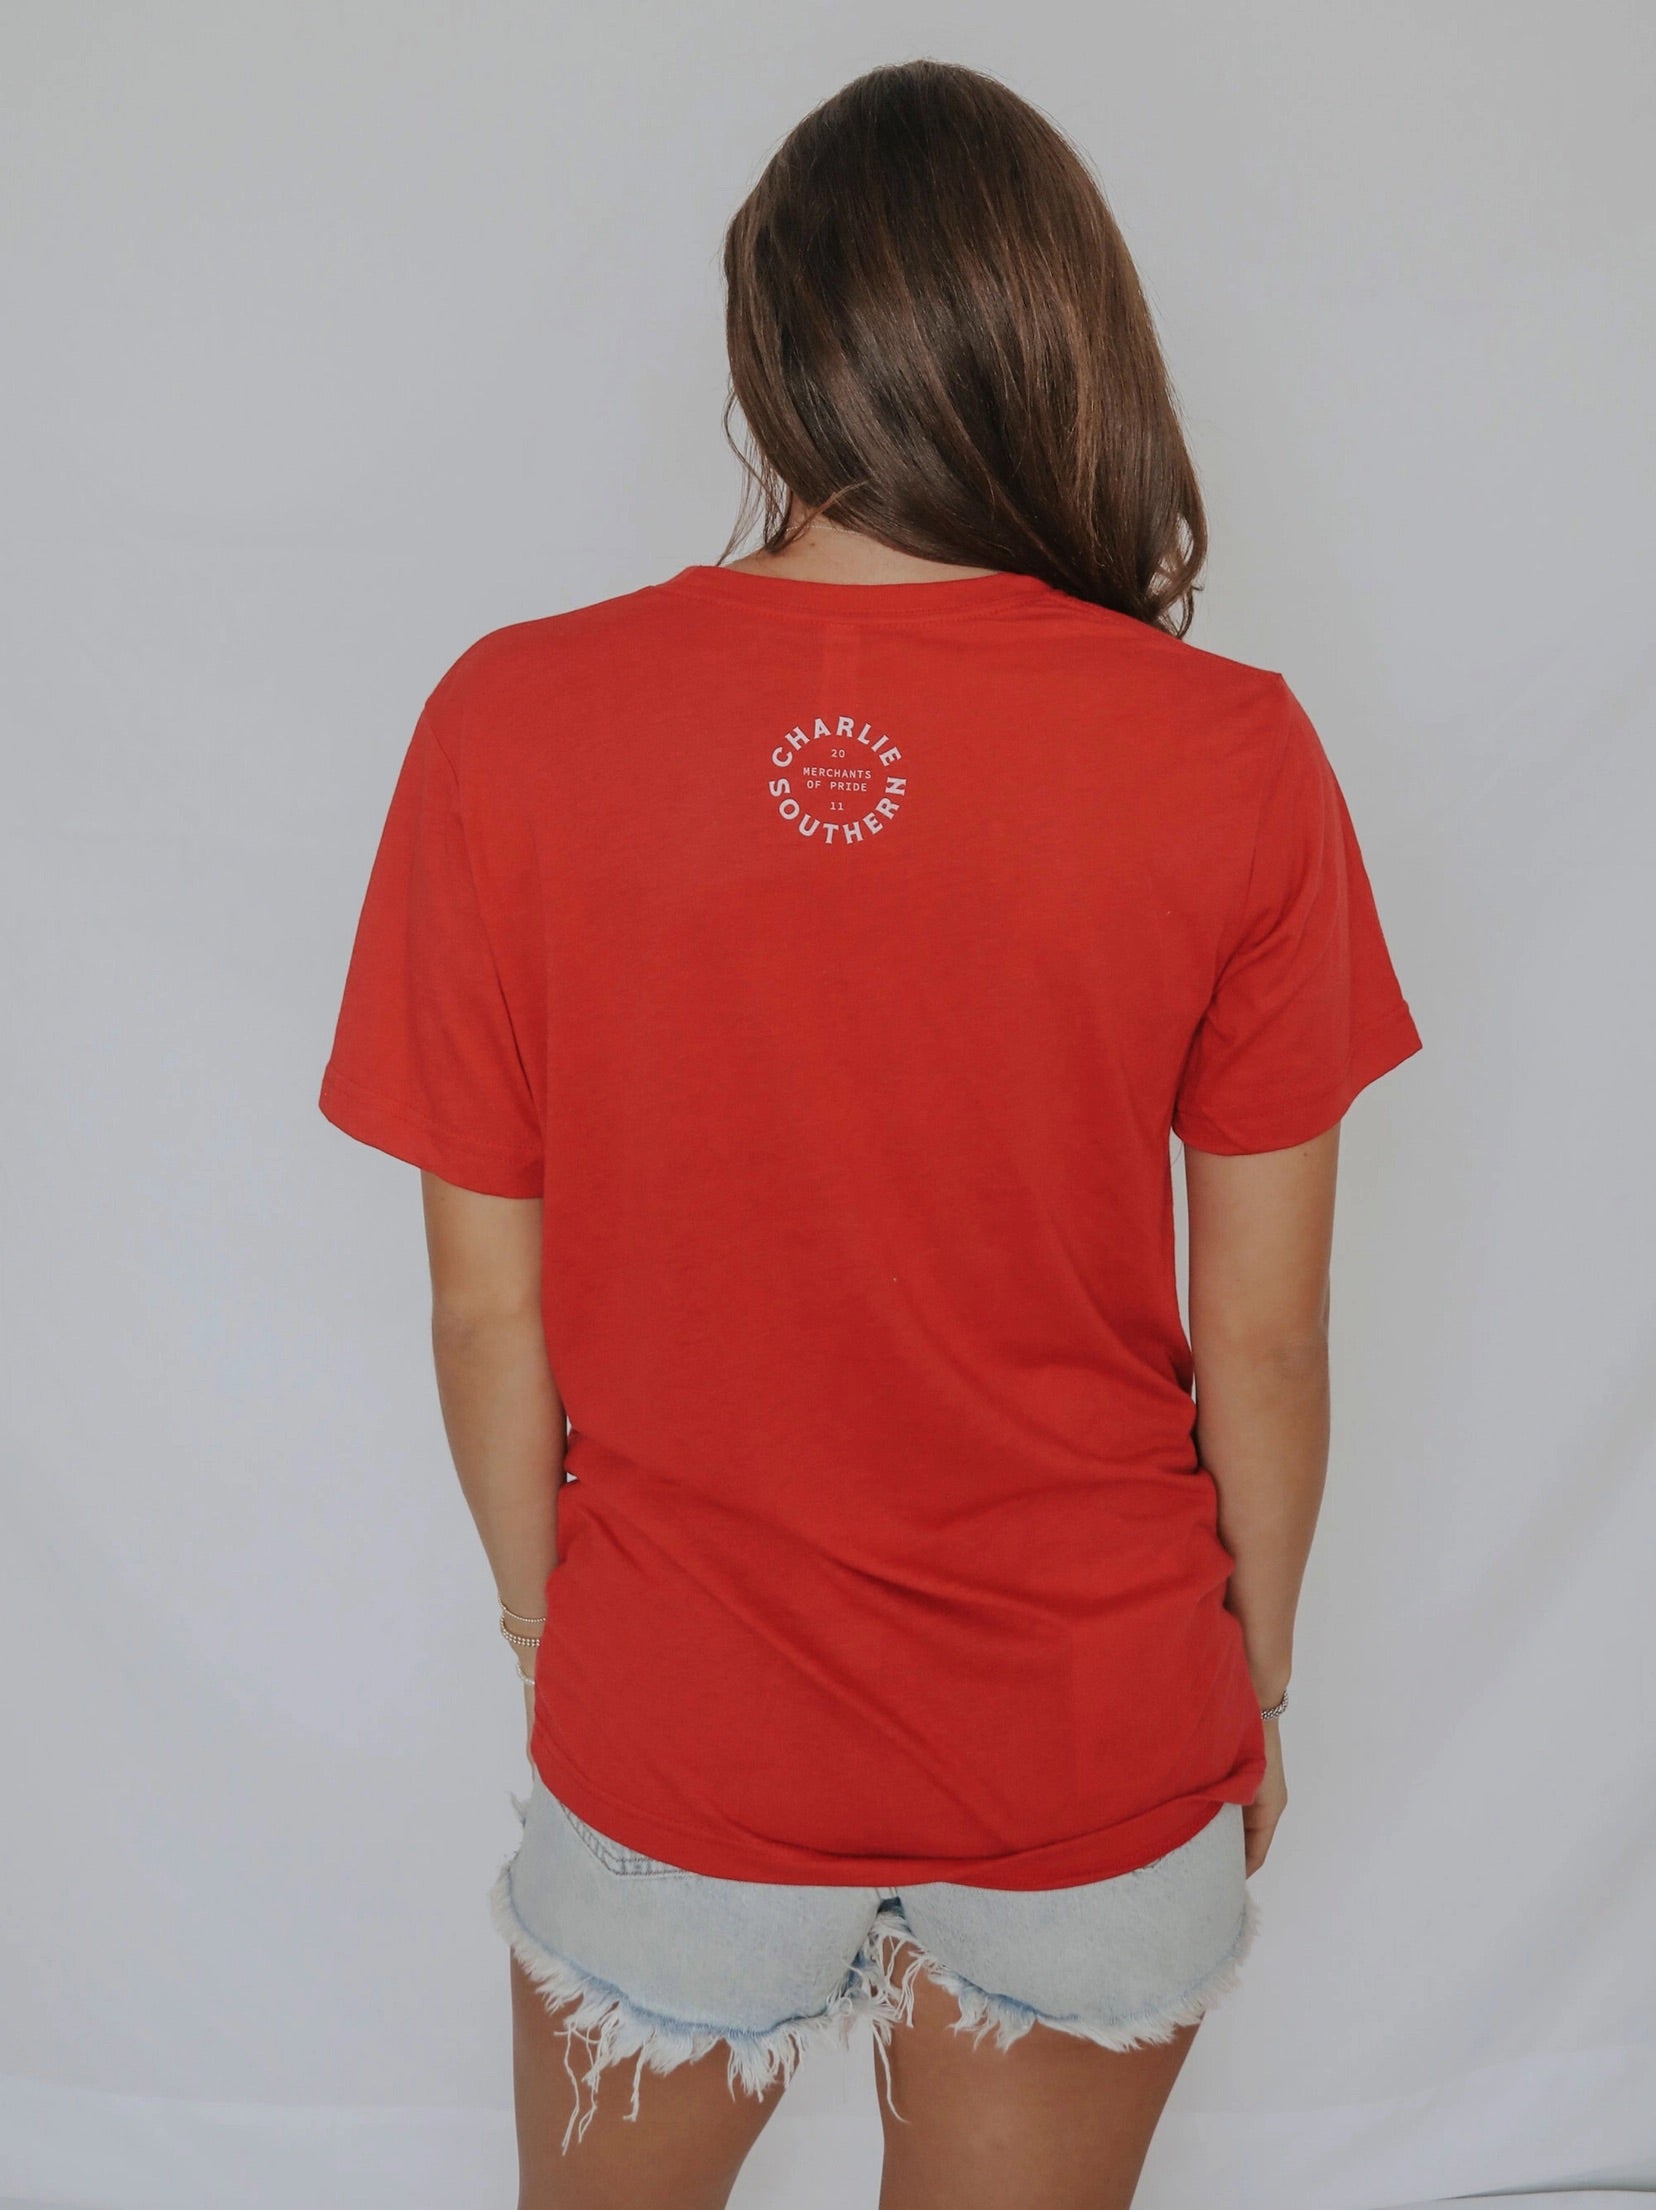 Red t-shirt with the brands logo on the back of hte t-shirt "charlie southern"